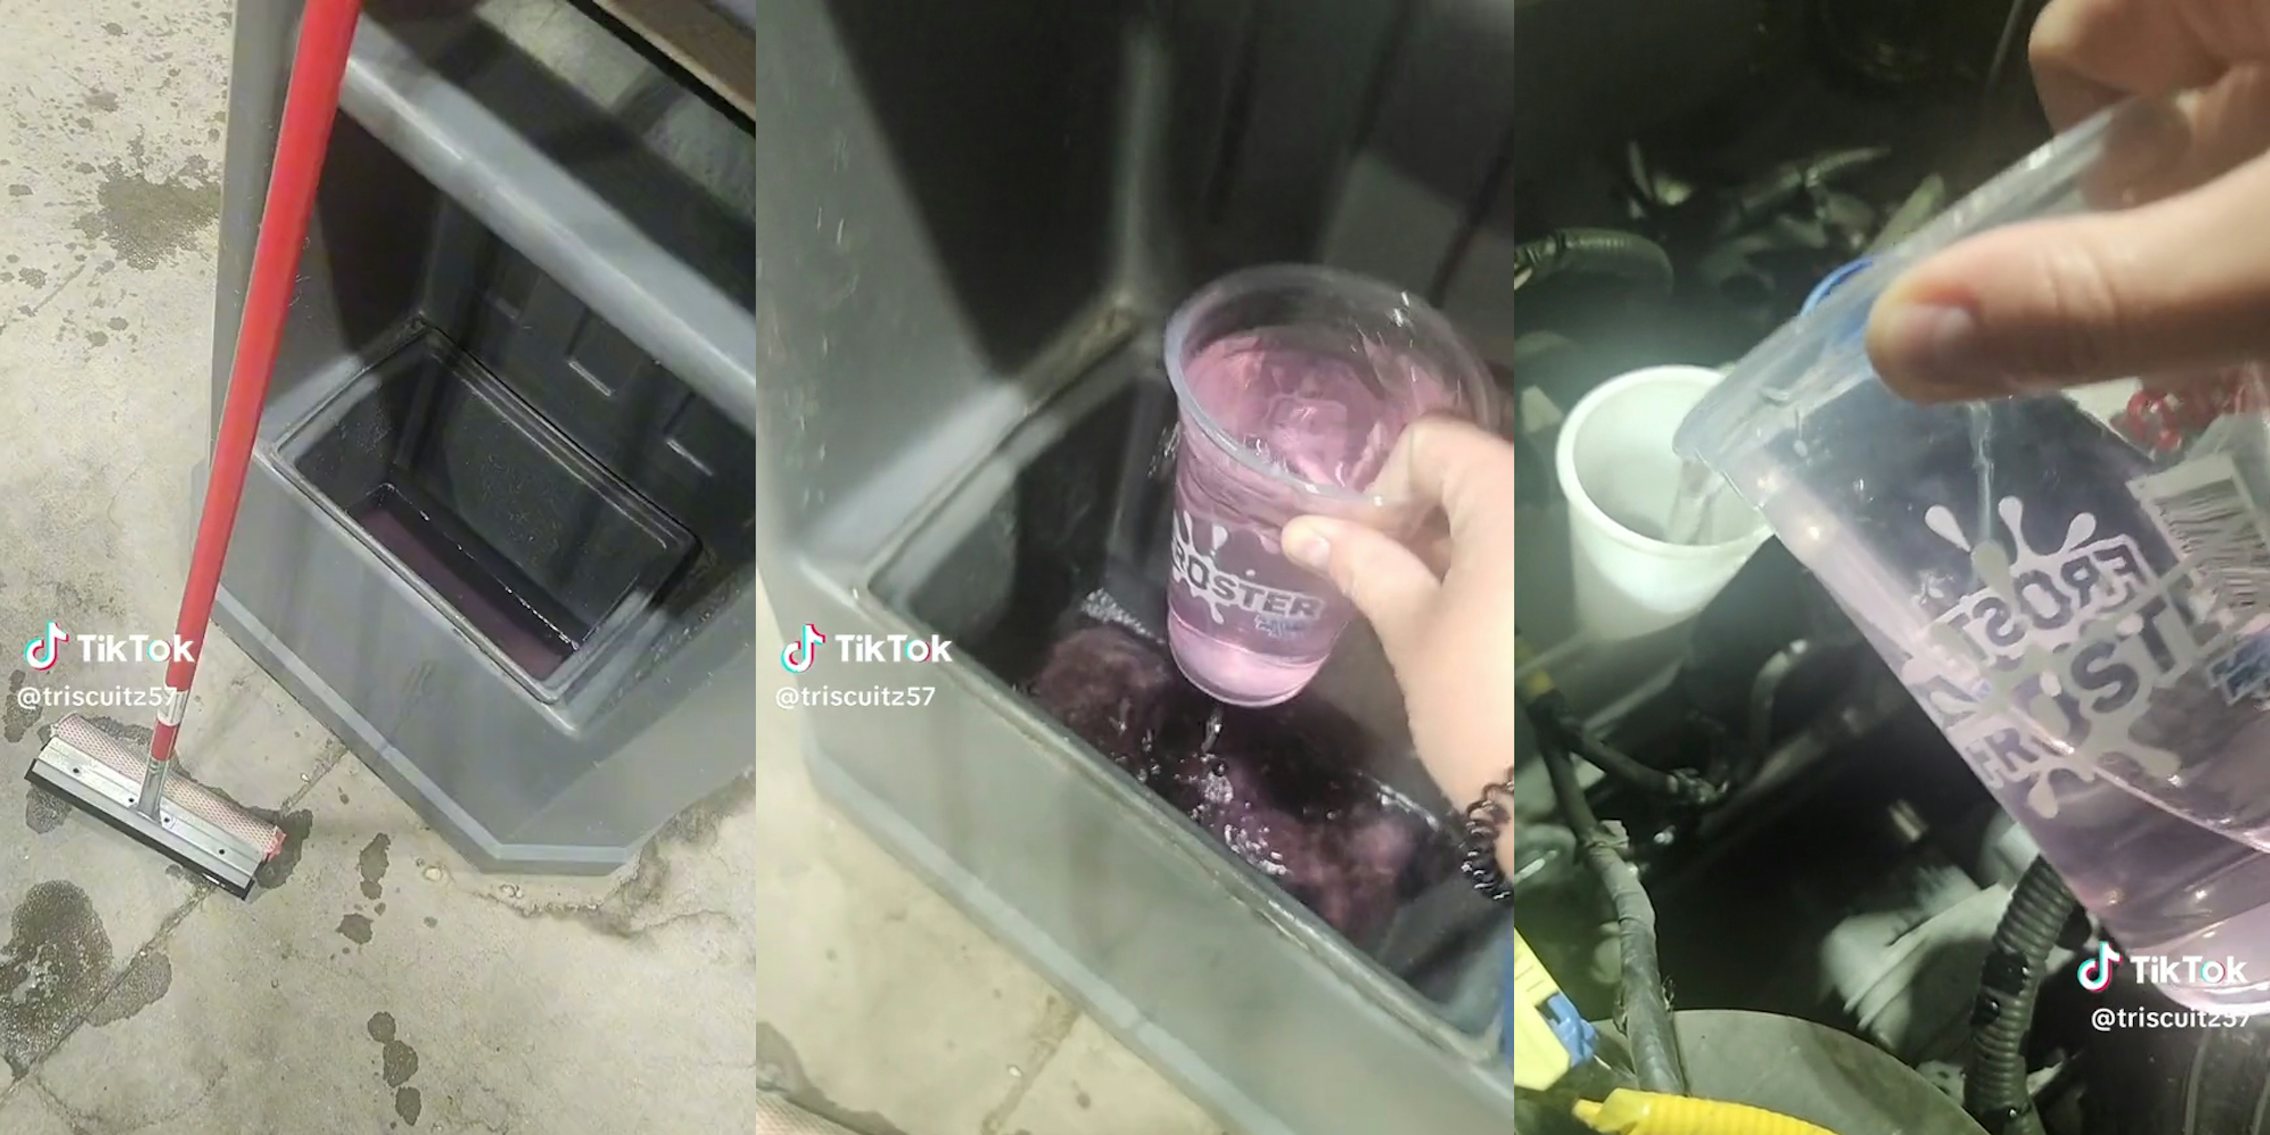 gas station squeegee (l) hand using plastic cup to scoop up washer fluid (c) hand pouring washer fluid into car reservoir (r)